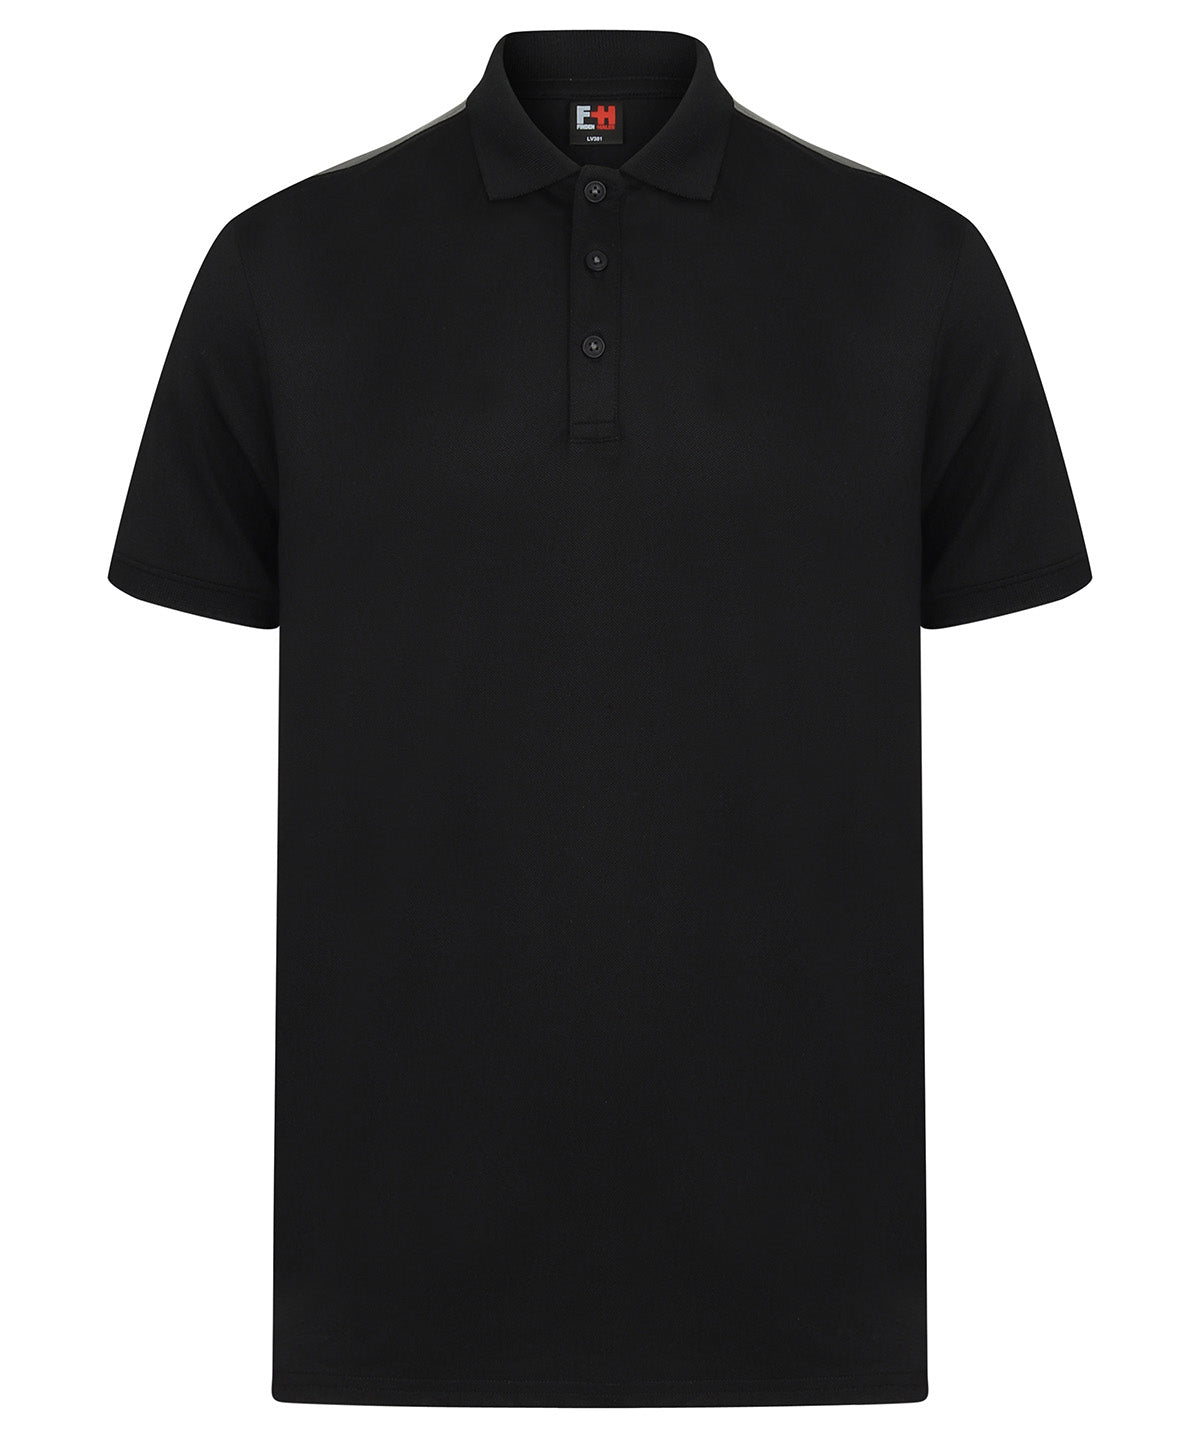 Personalised Polo Shirts - Black Finden & Hales Contrast panel polo